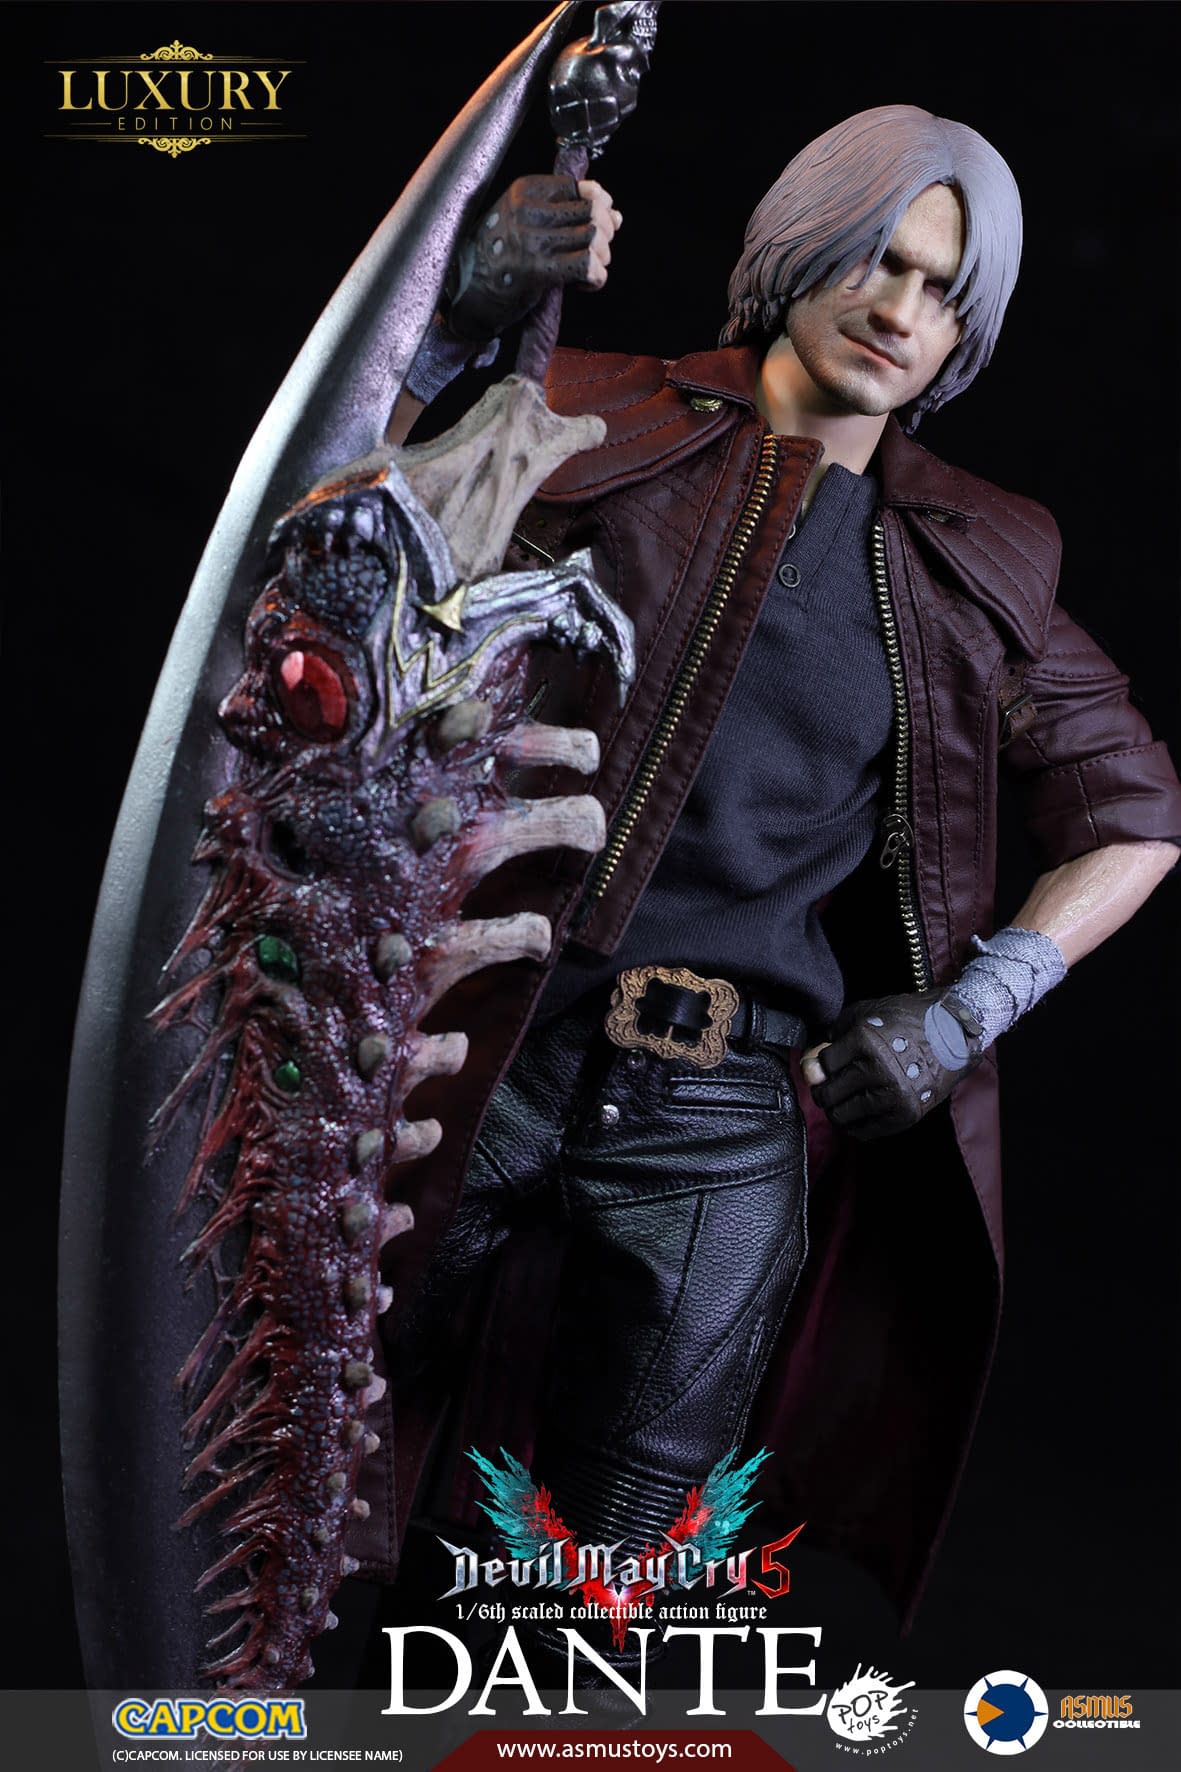 "Devil May Cry V" Dante is Ready to Slay with New Asmus Toys Figure